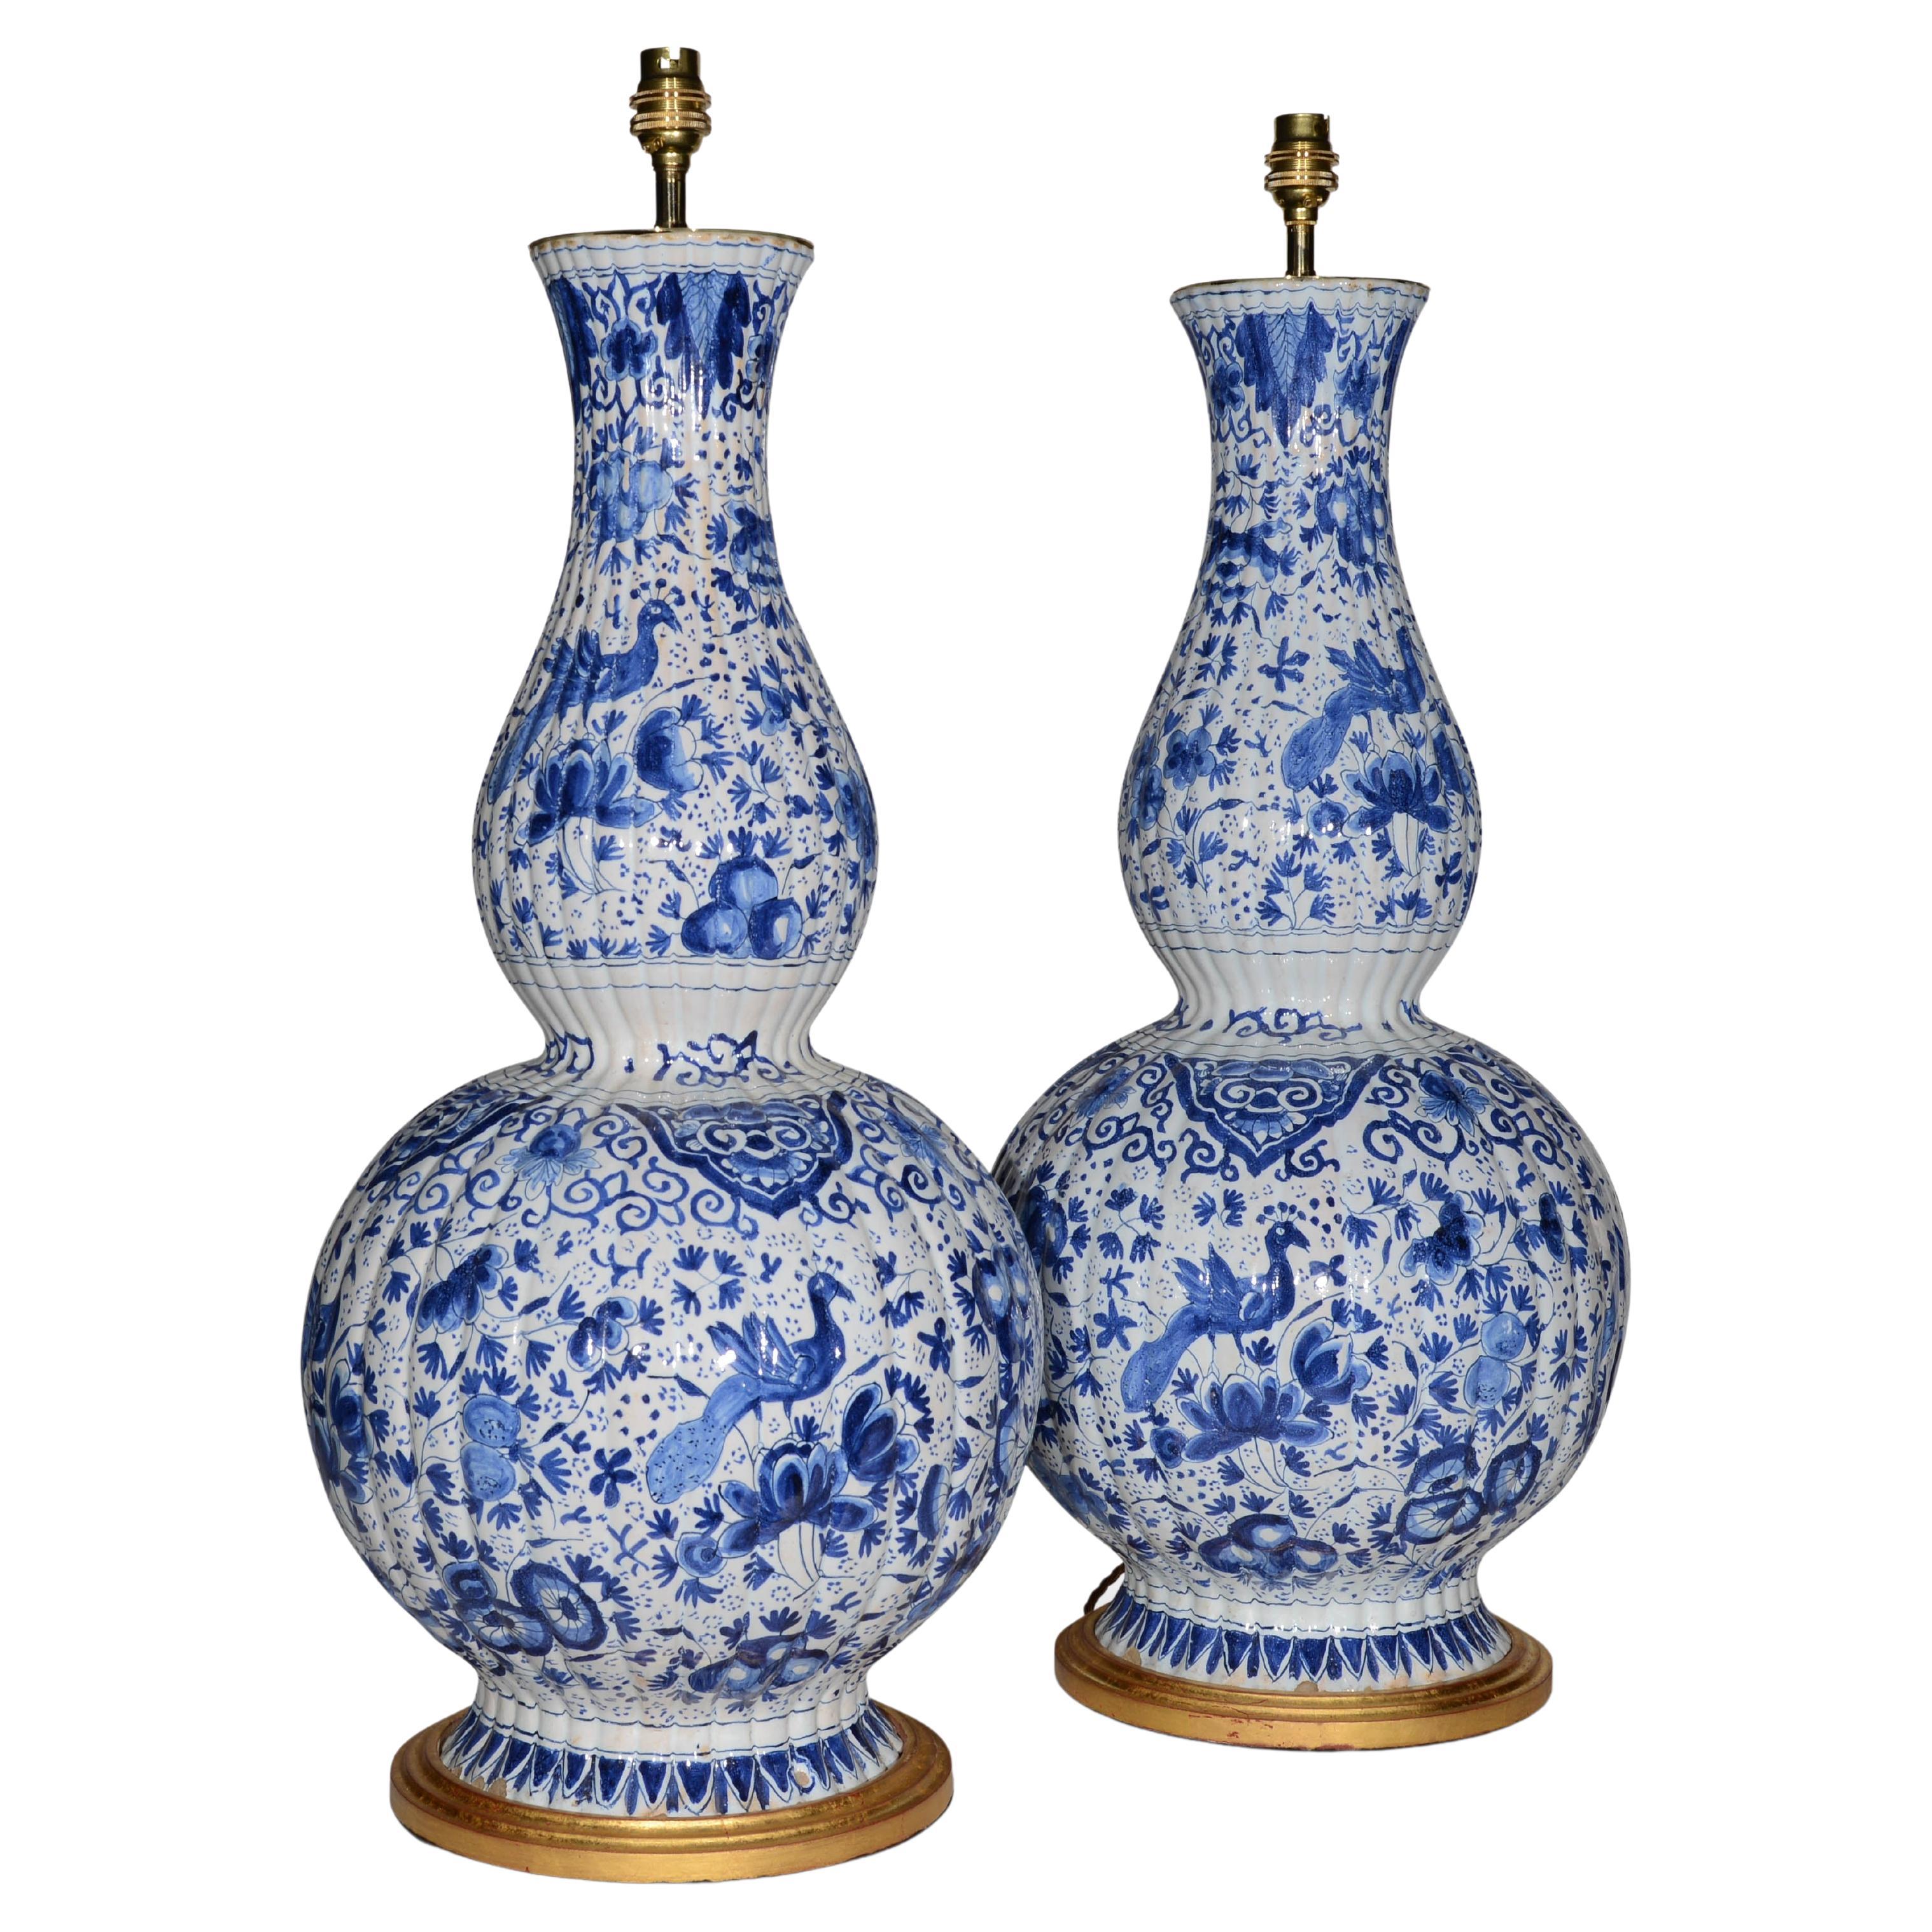 Large Pair of Blue and White 19th Century Delft Double Gourd Table Lamps